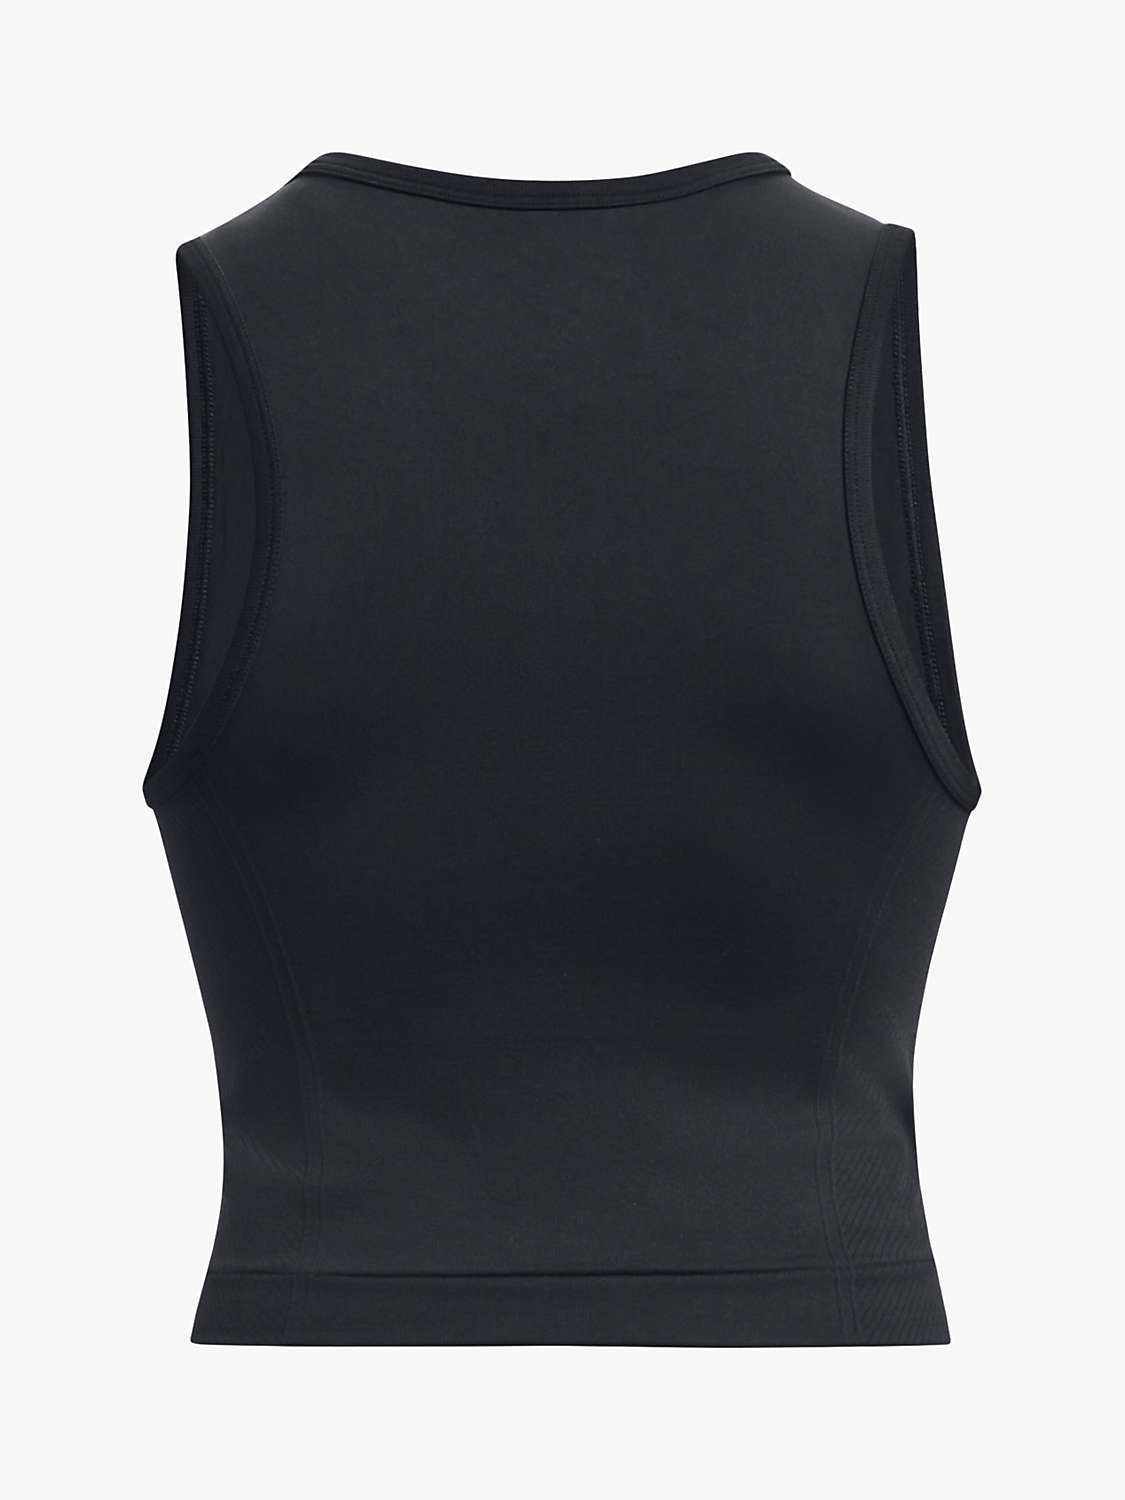 Buy Under Armour Train Seamless Tank Top, Black/White Online at johnlewis.com